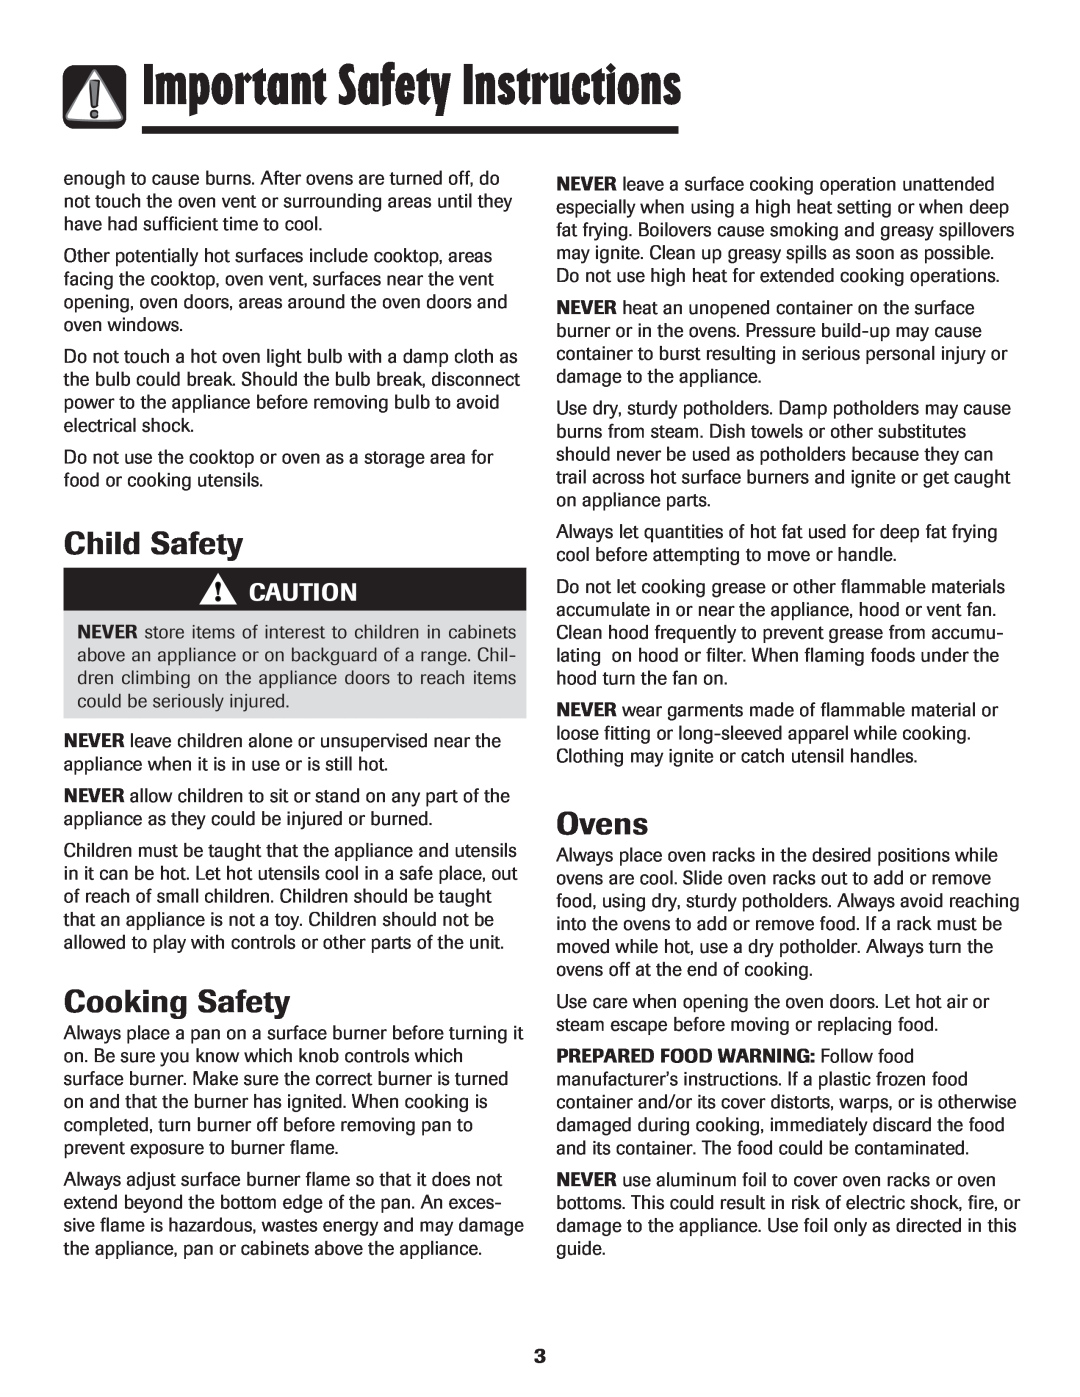 Maytag 850 important safety instructions Child Safety, Cooking Safety, Ovens, Important Safety Instructions 